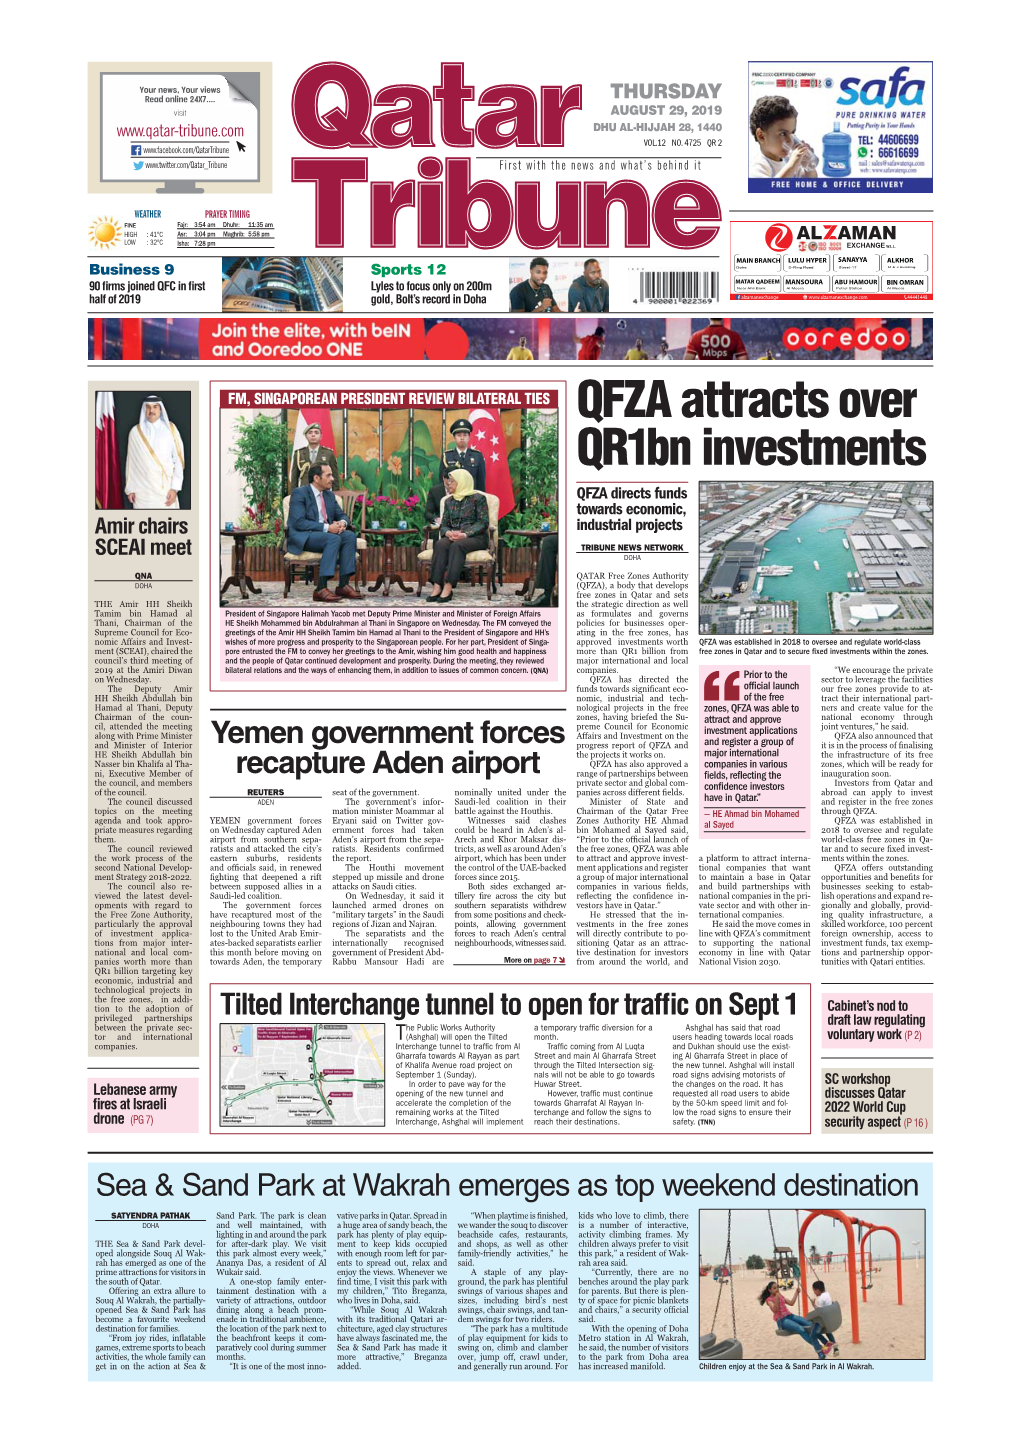 QFZA Attracts Over Qr1bn Investments QFZA Directs Funds Towards Economic, Amir Chairs Industrial Projects TRIBUNE NEWS NETWORK SCEAI Meet DOHA